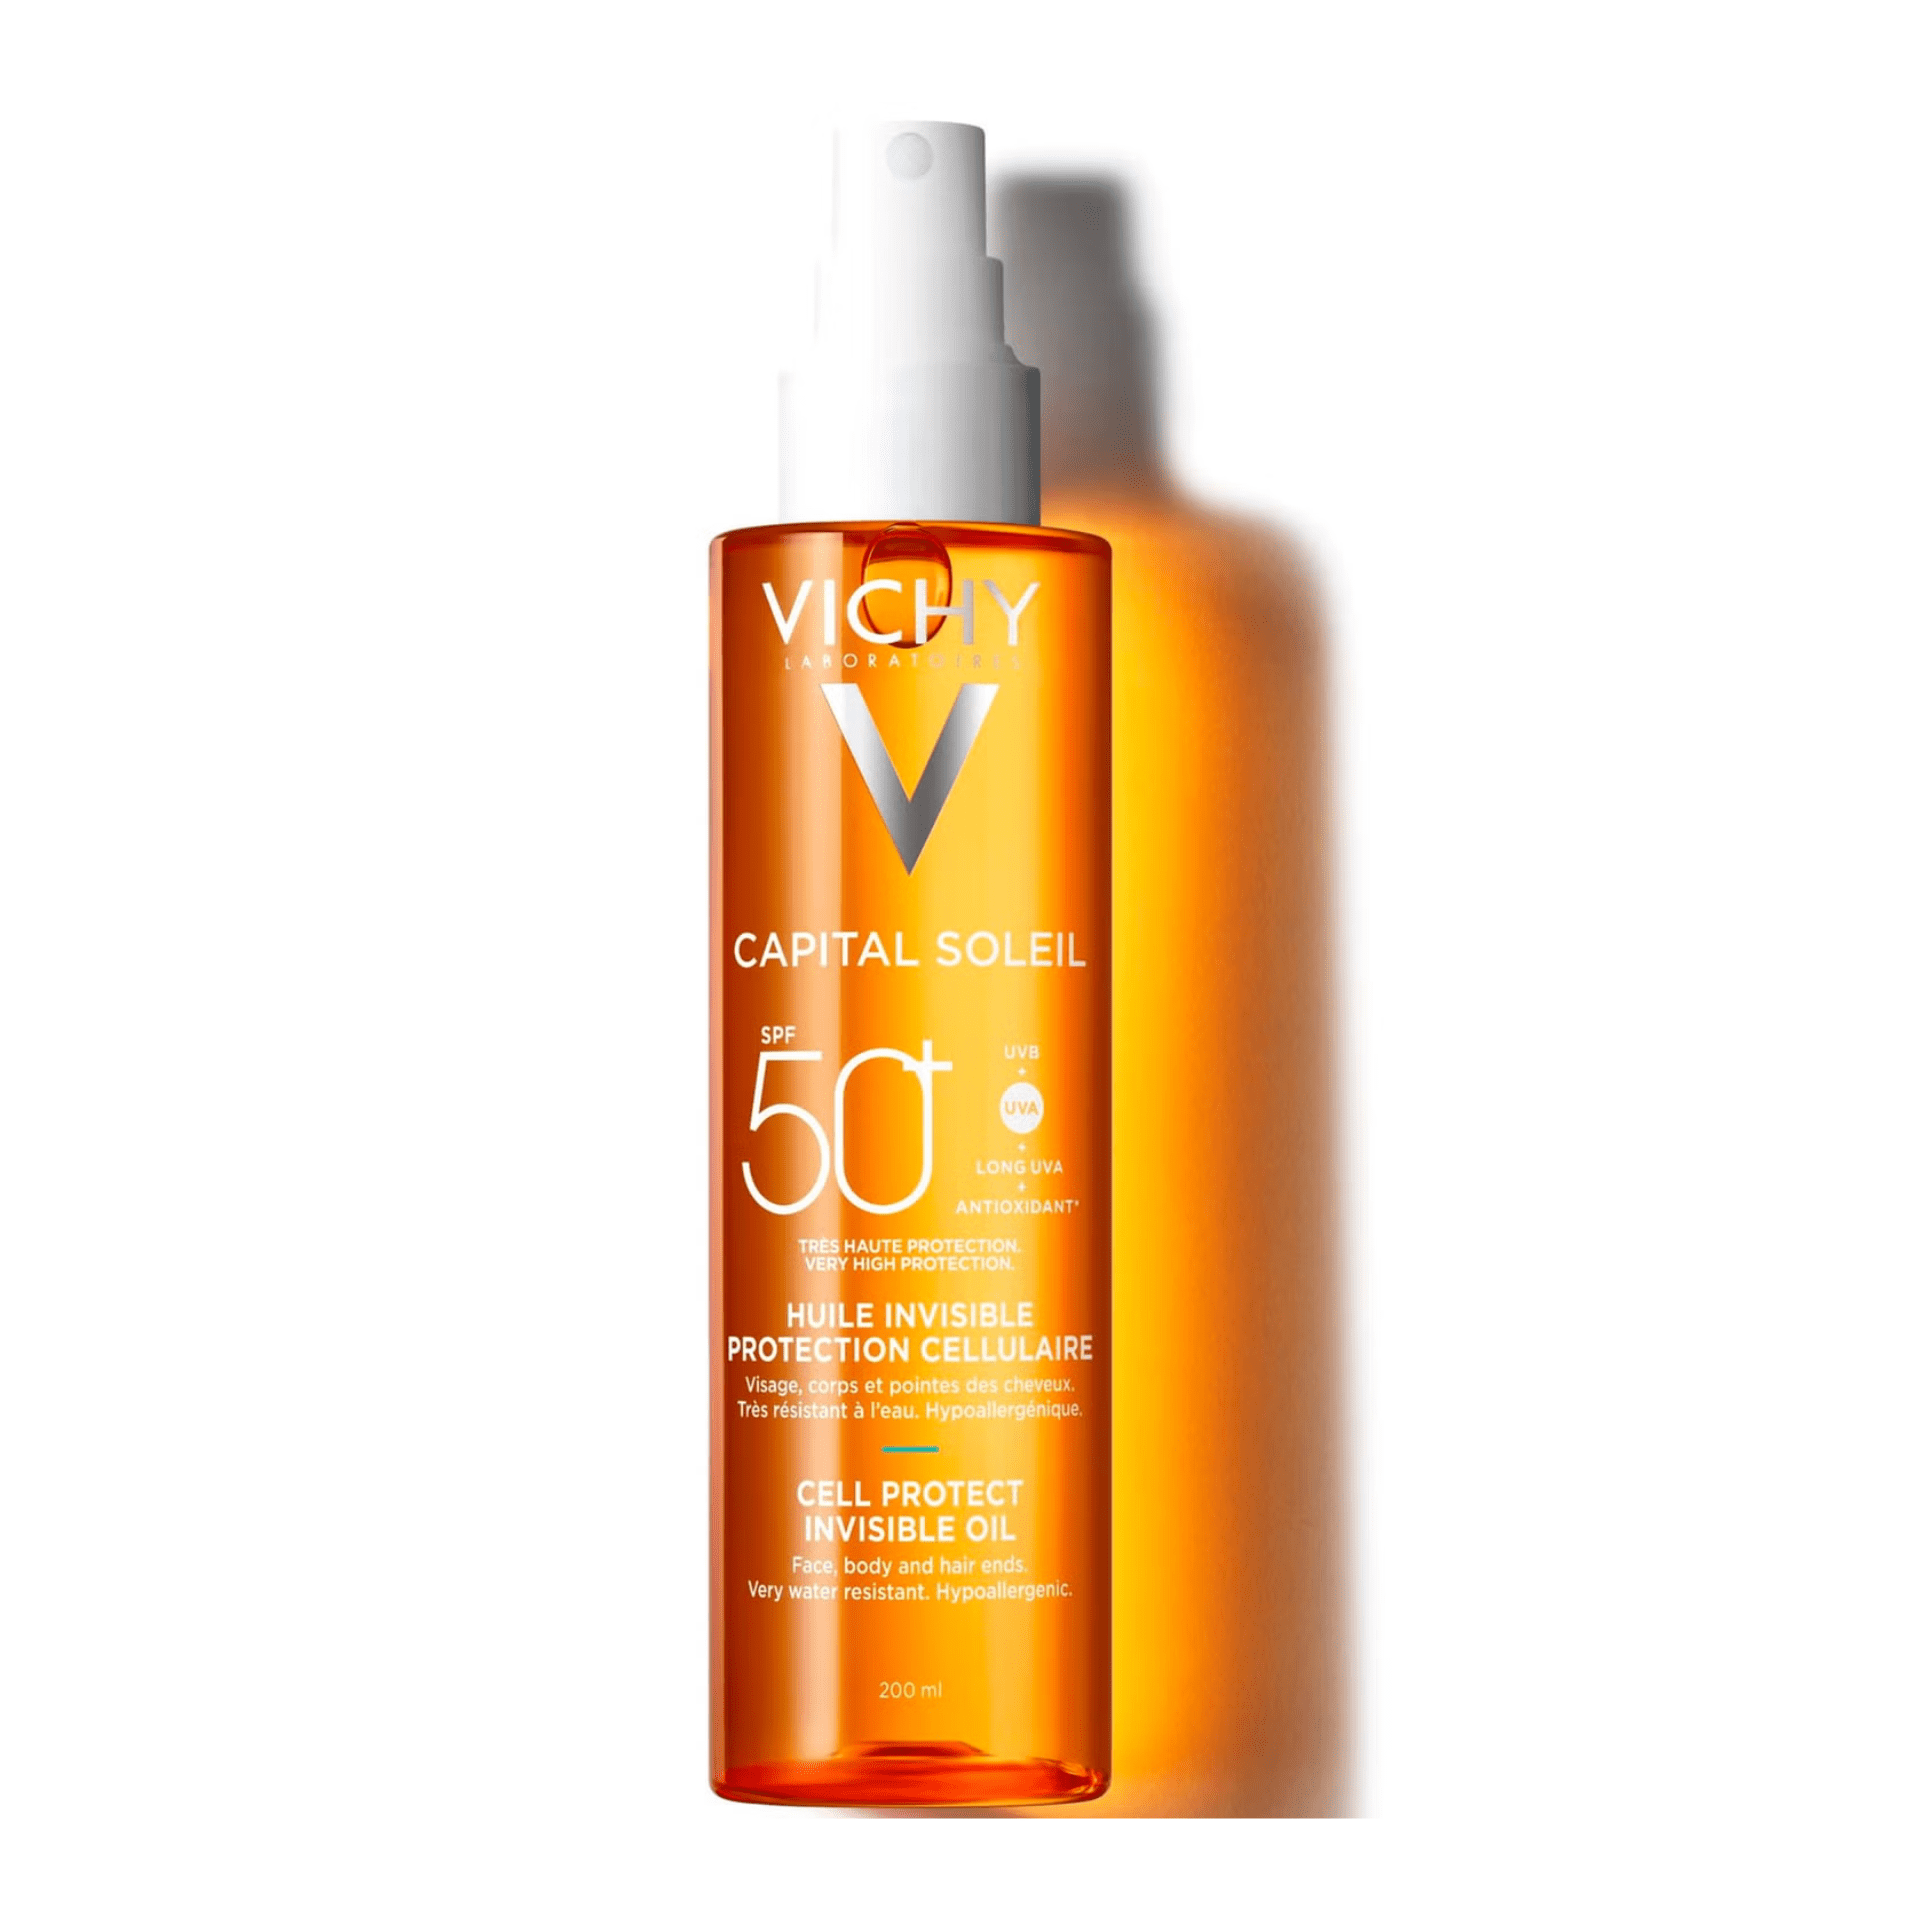 Vichy Capital Soleil Protect Invisible Oil SPF 50+